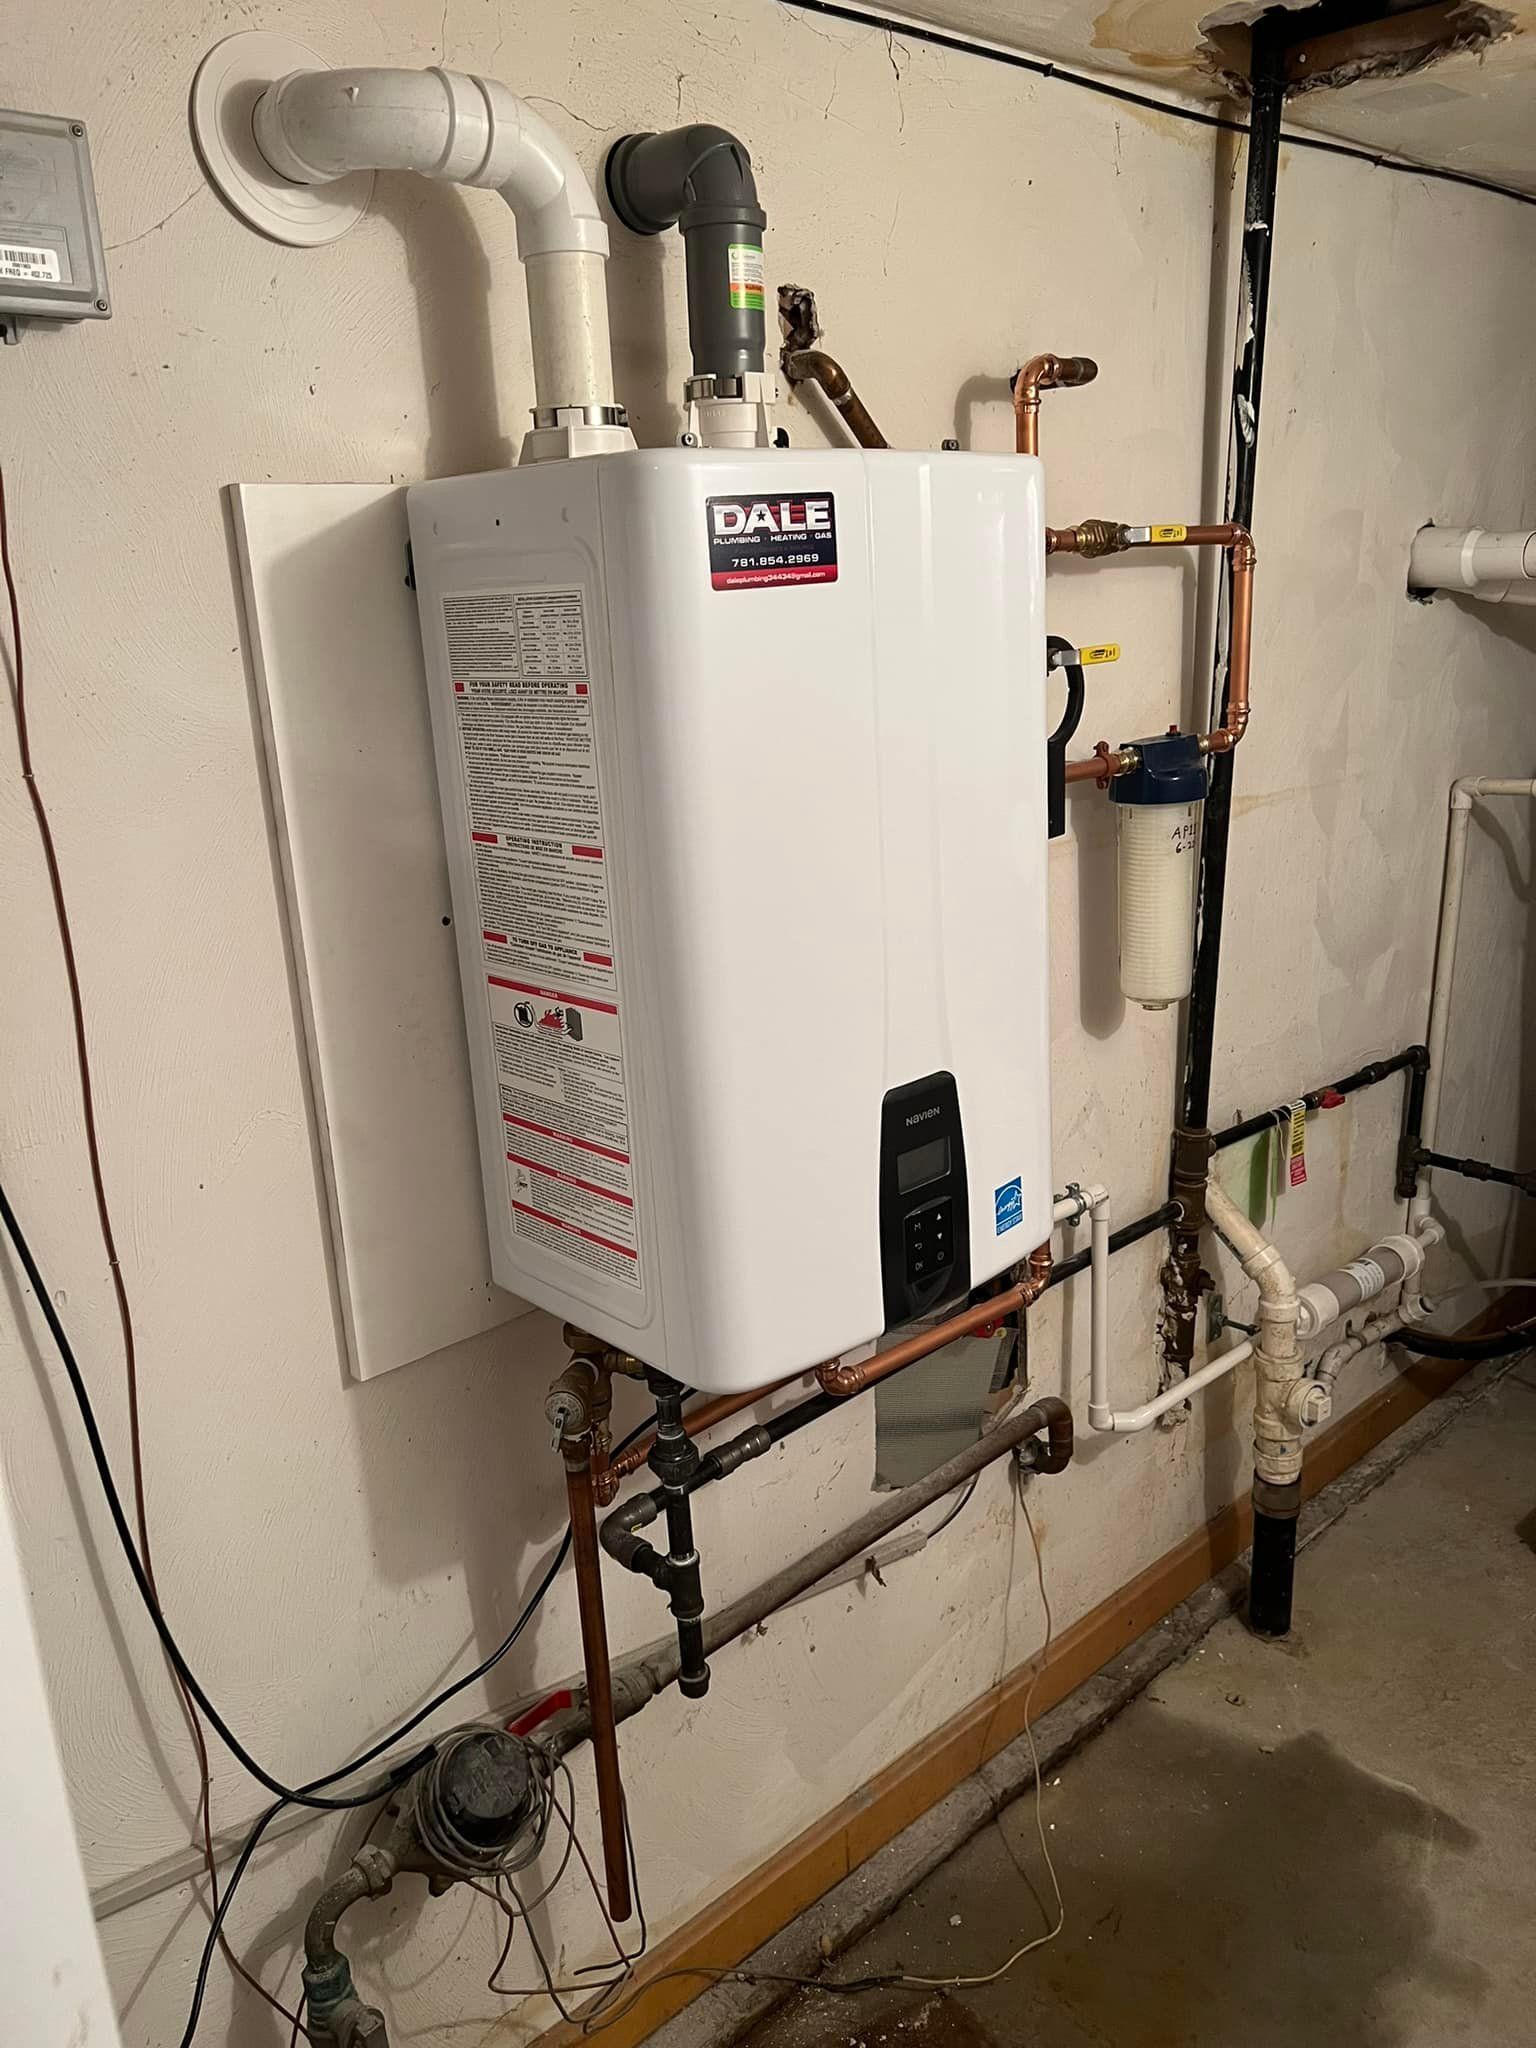 Dale Plumbing tankless water heater installation servicing in  Massachusetts Regions